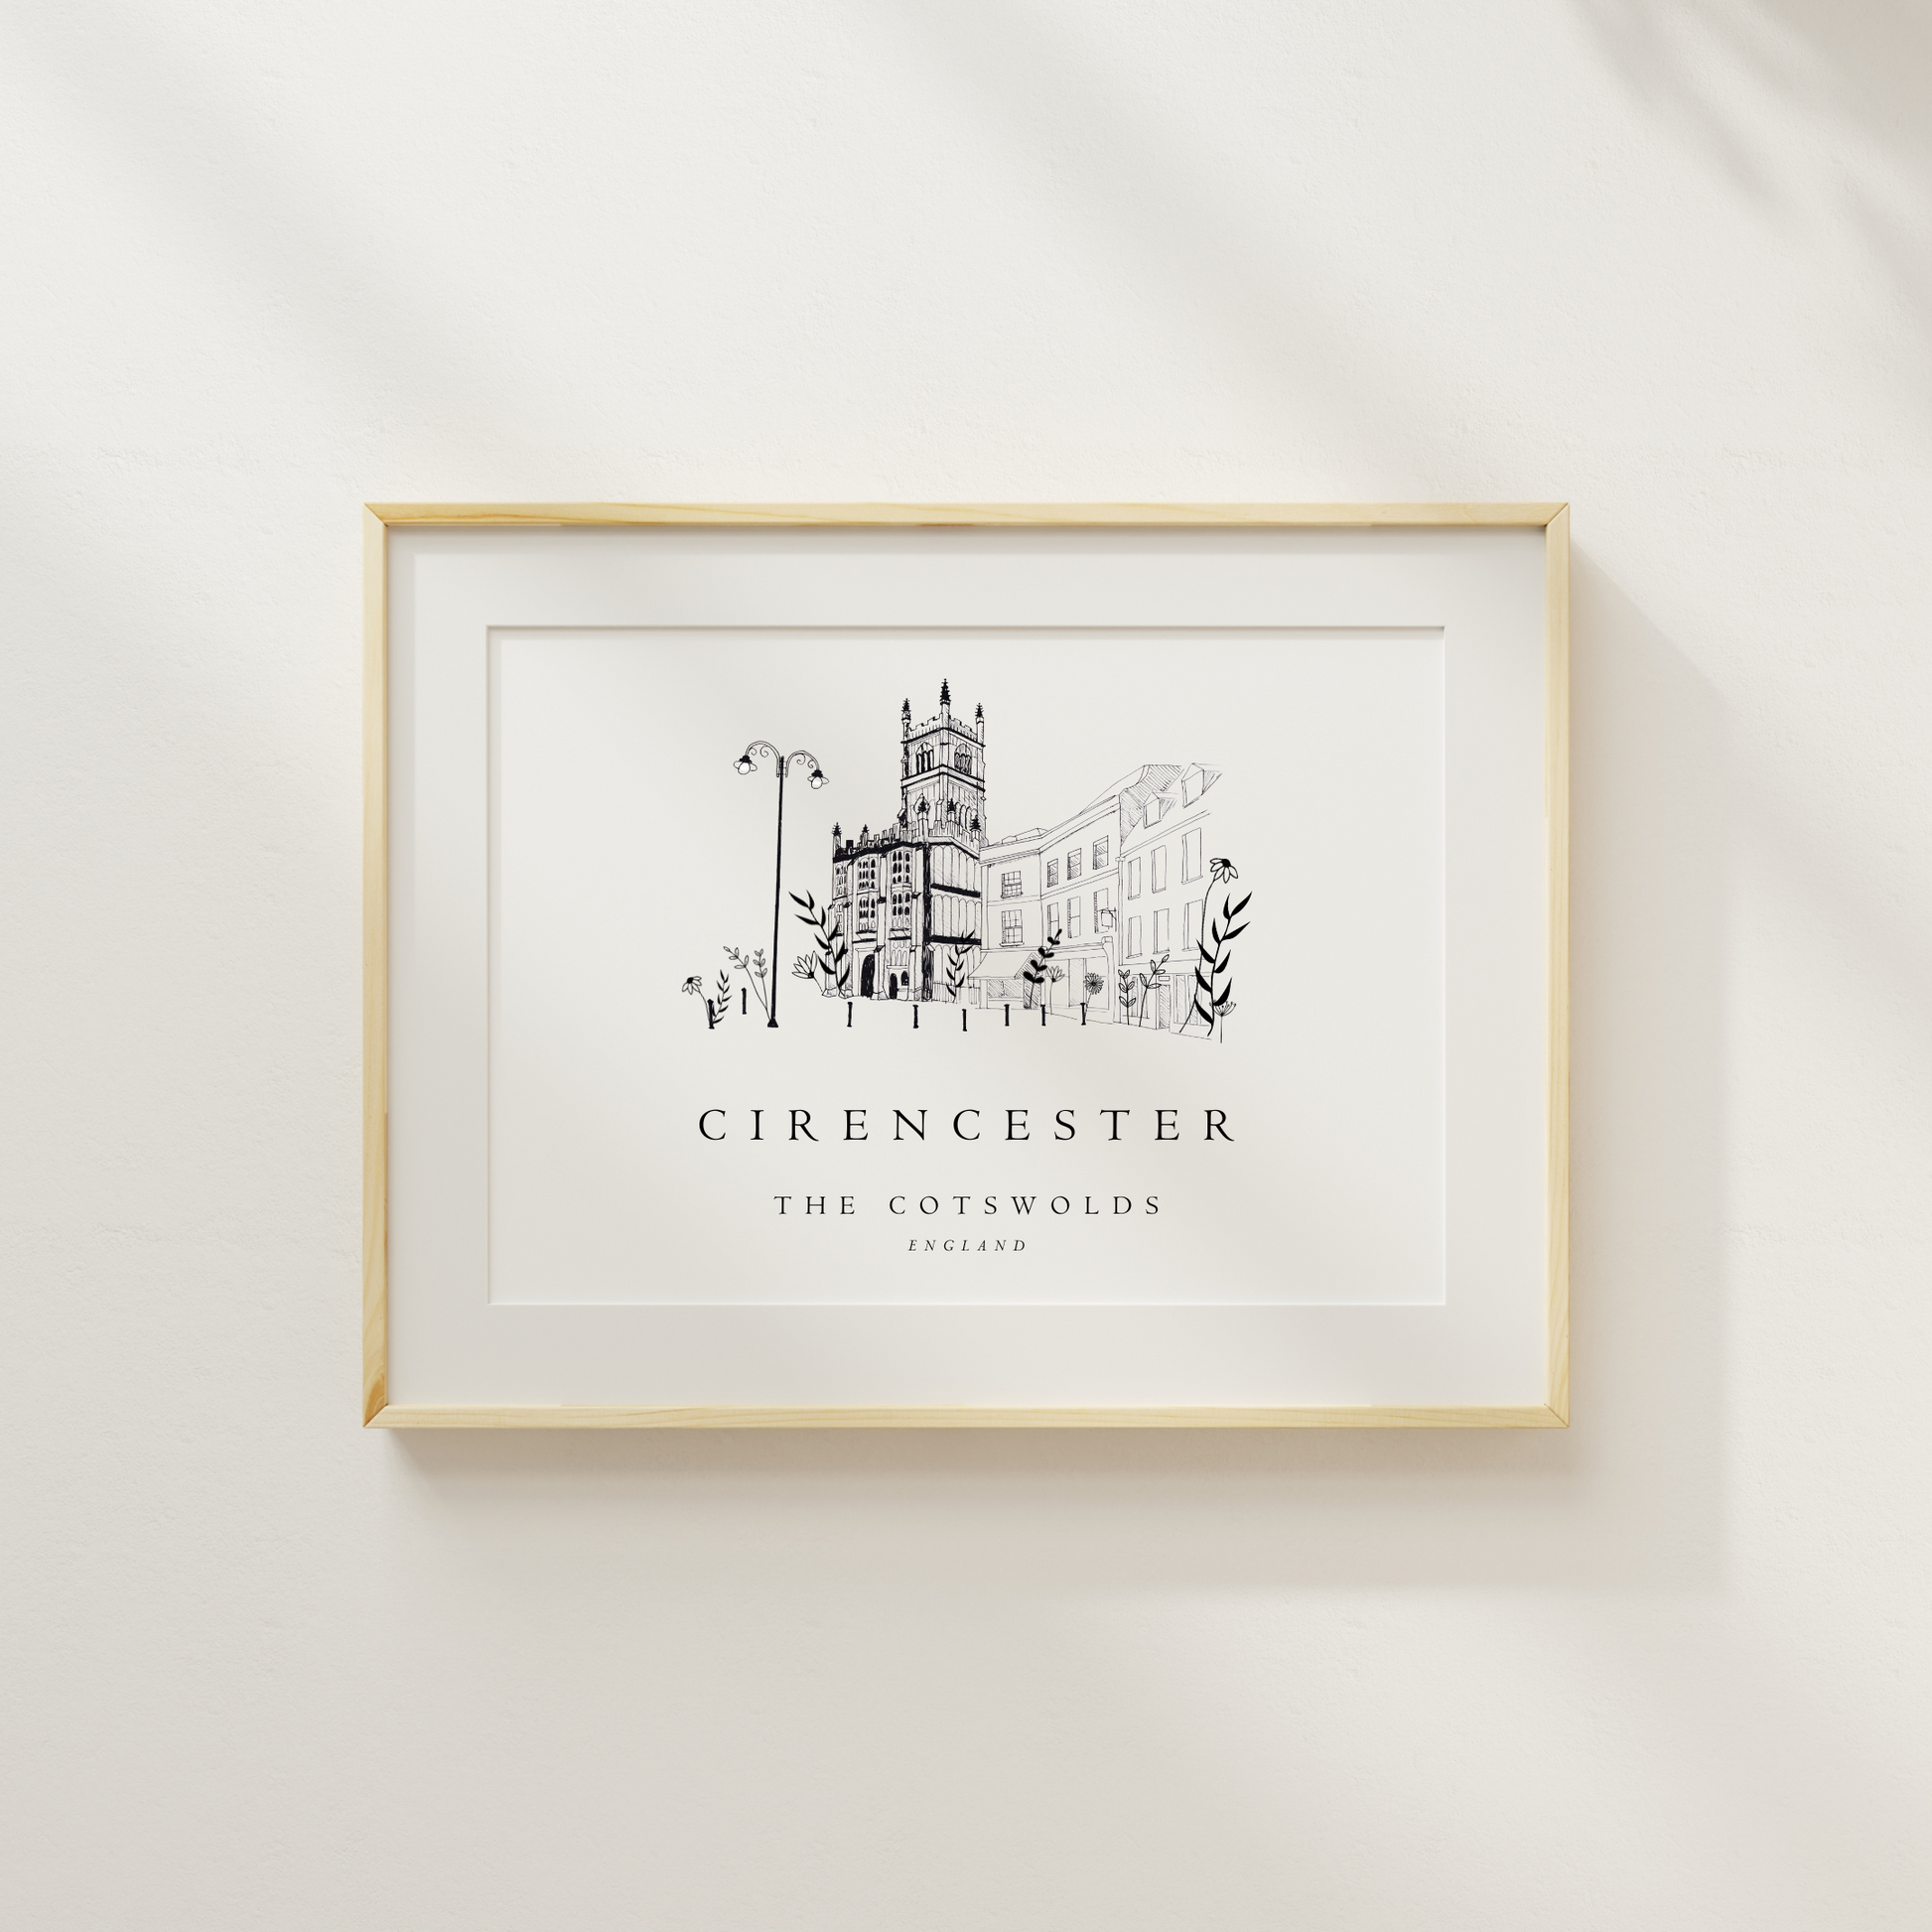 Cirencester Cotswolds Print | St. John The Baptist Church | The Cotswolds | A4 or A5 - The Cotswold Illustrated Company